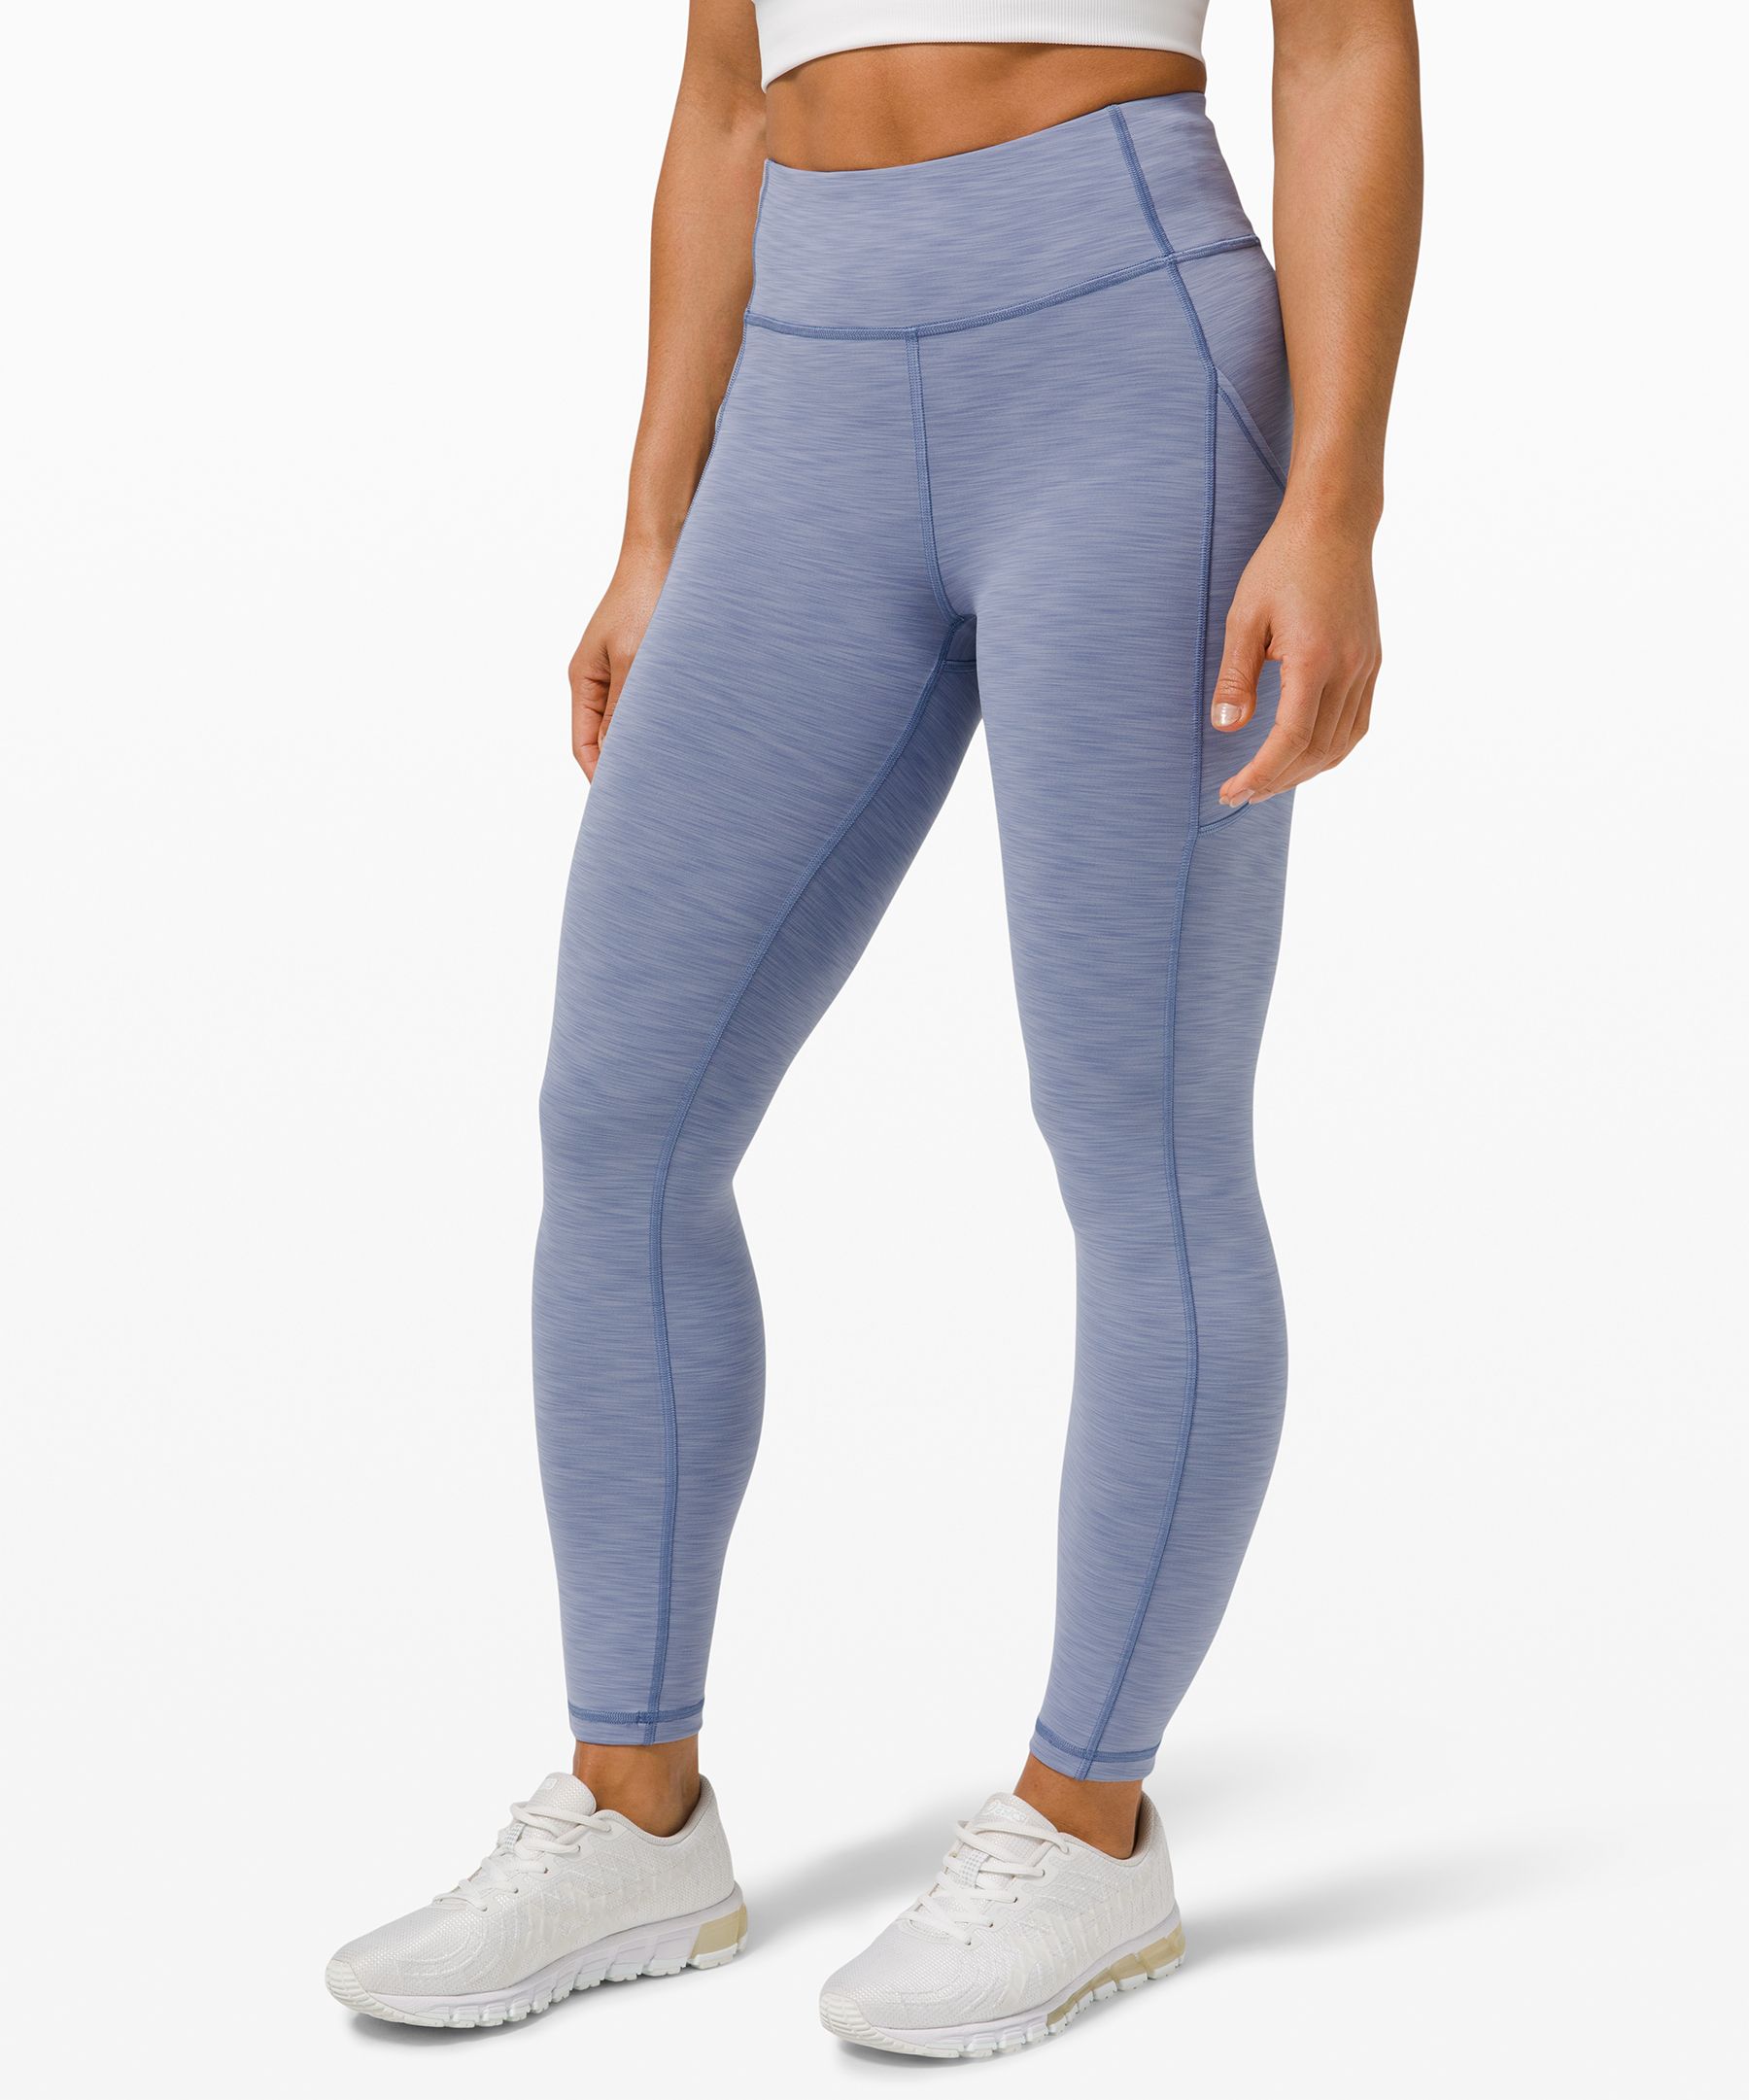 Lululemon Invigorate High-rise Tights 25 In Heathered Water Drop